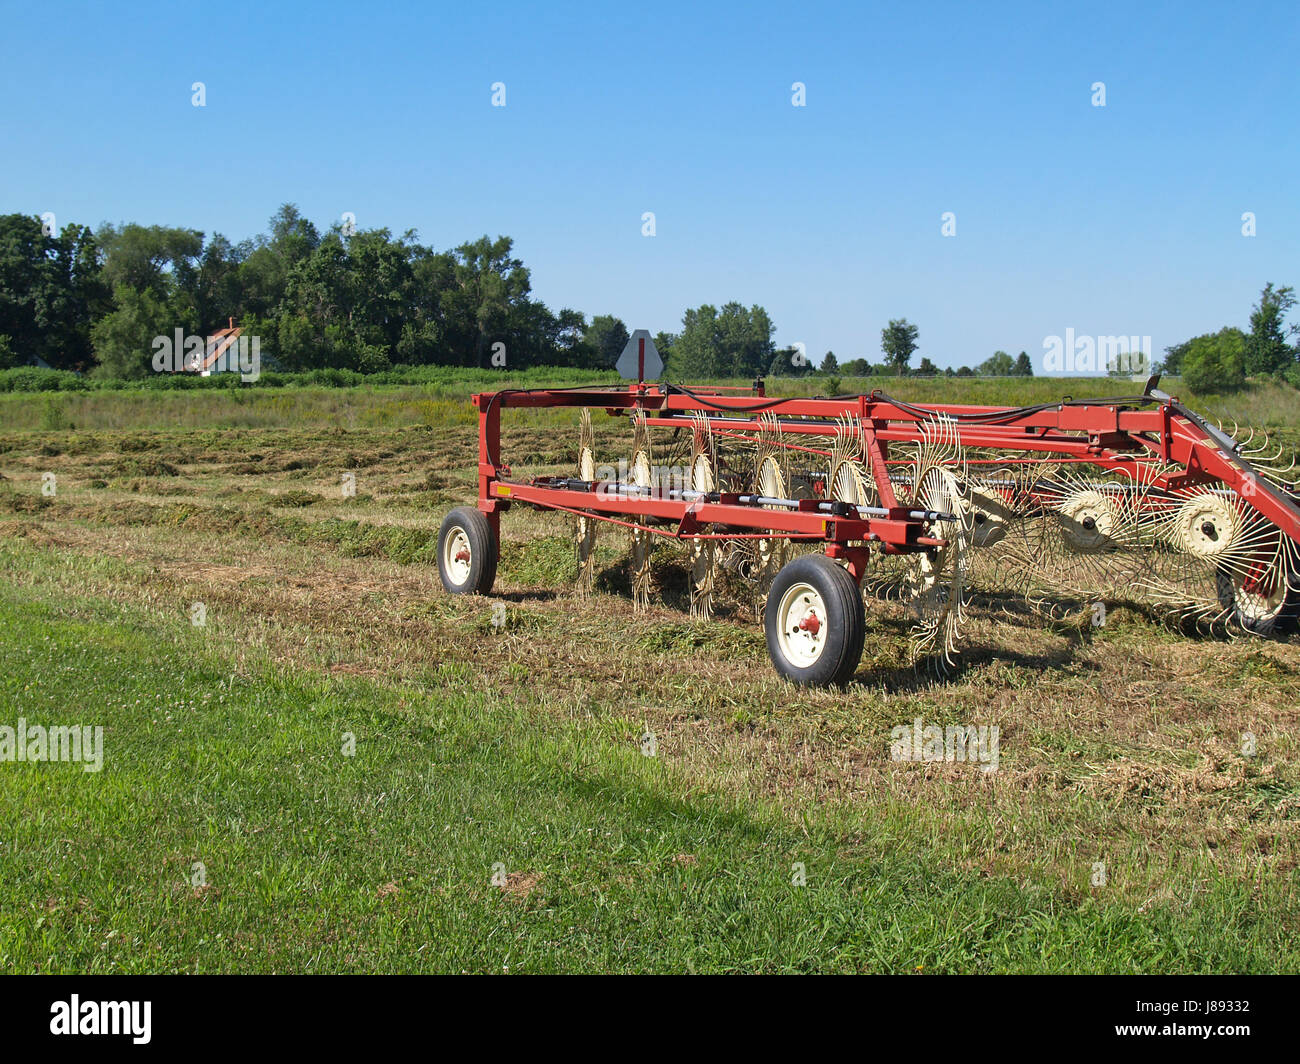 agriculture, farming, field, harvest, farm, hay, equipment, country, rake, Stock Photo